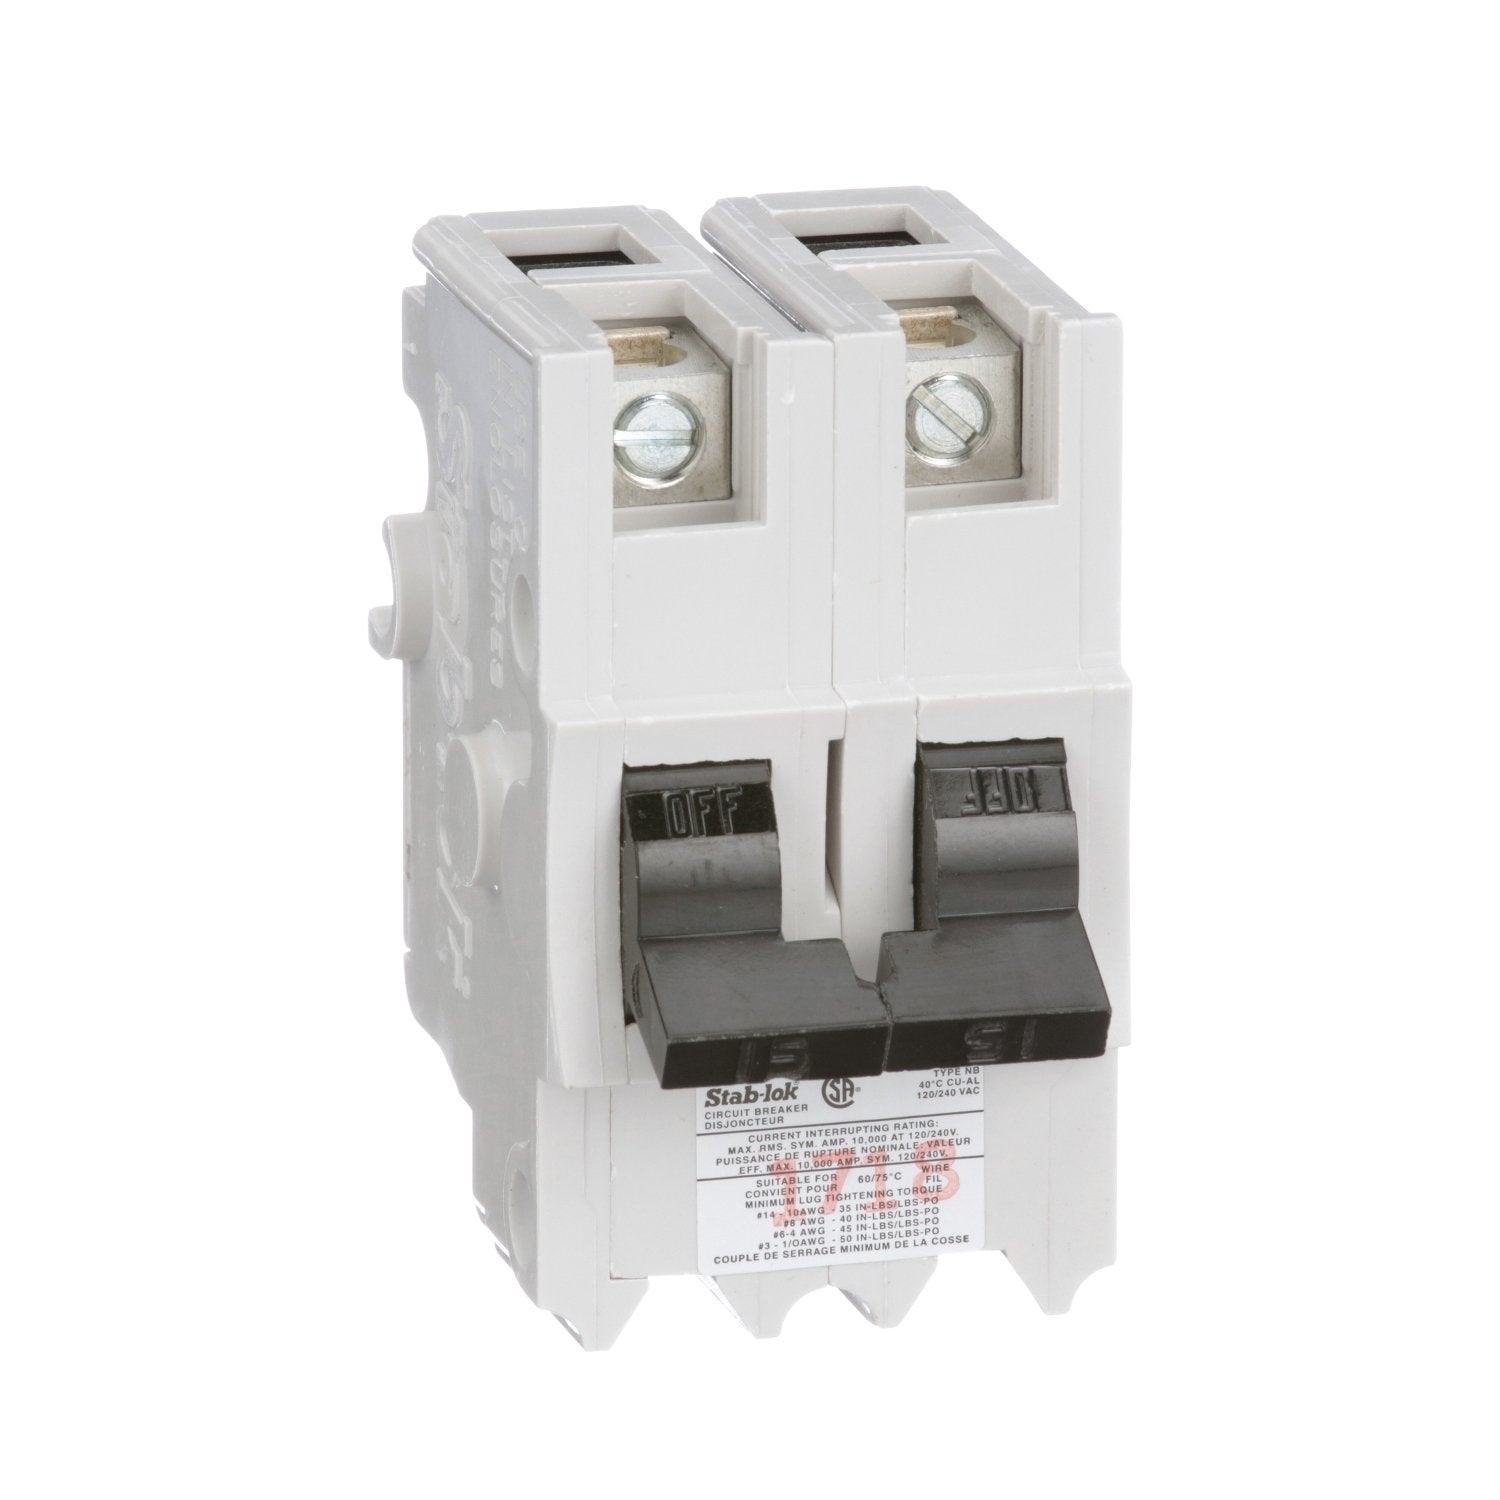 NB260 - Federal Pioneer 60 Amp Double Pole Bolt-On Circuit Breaker